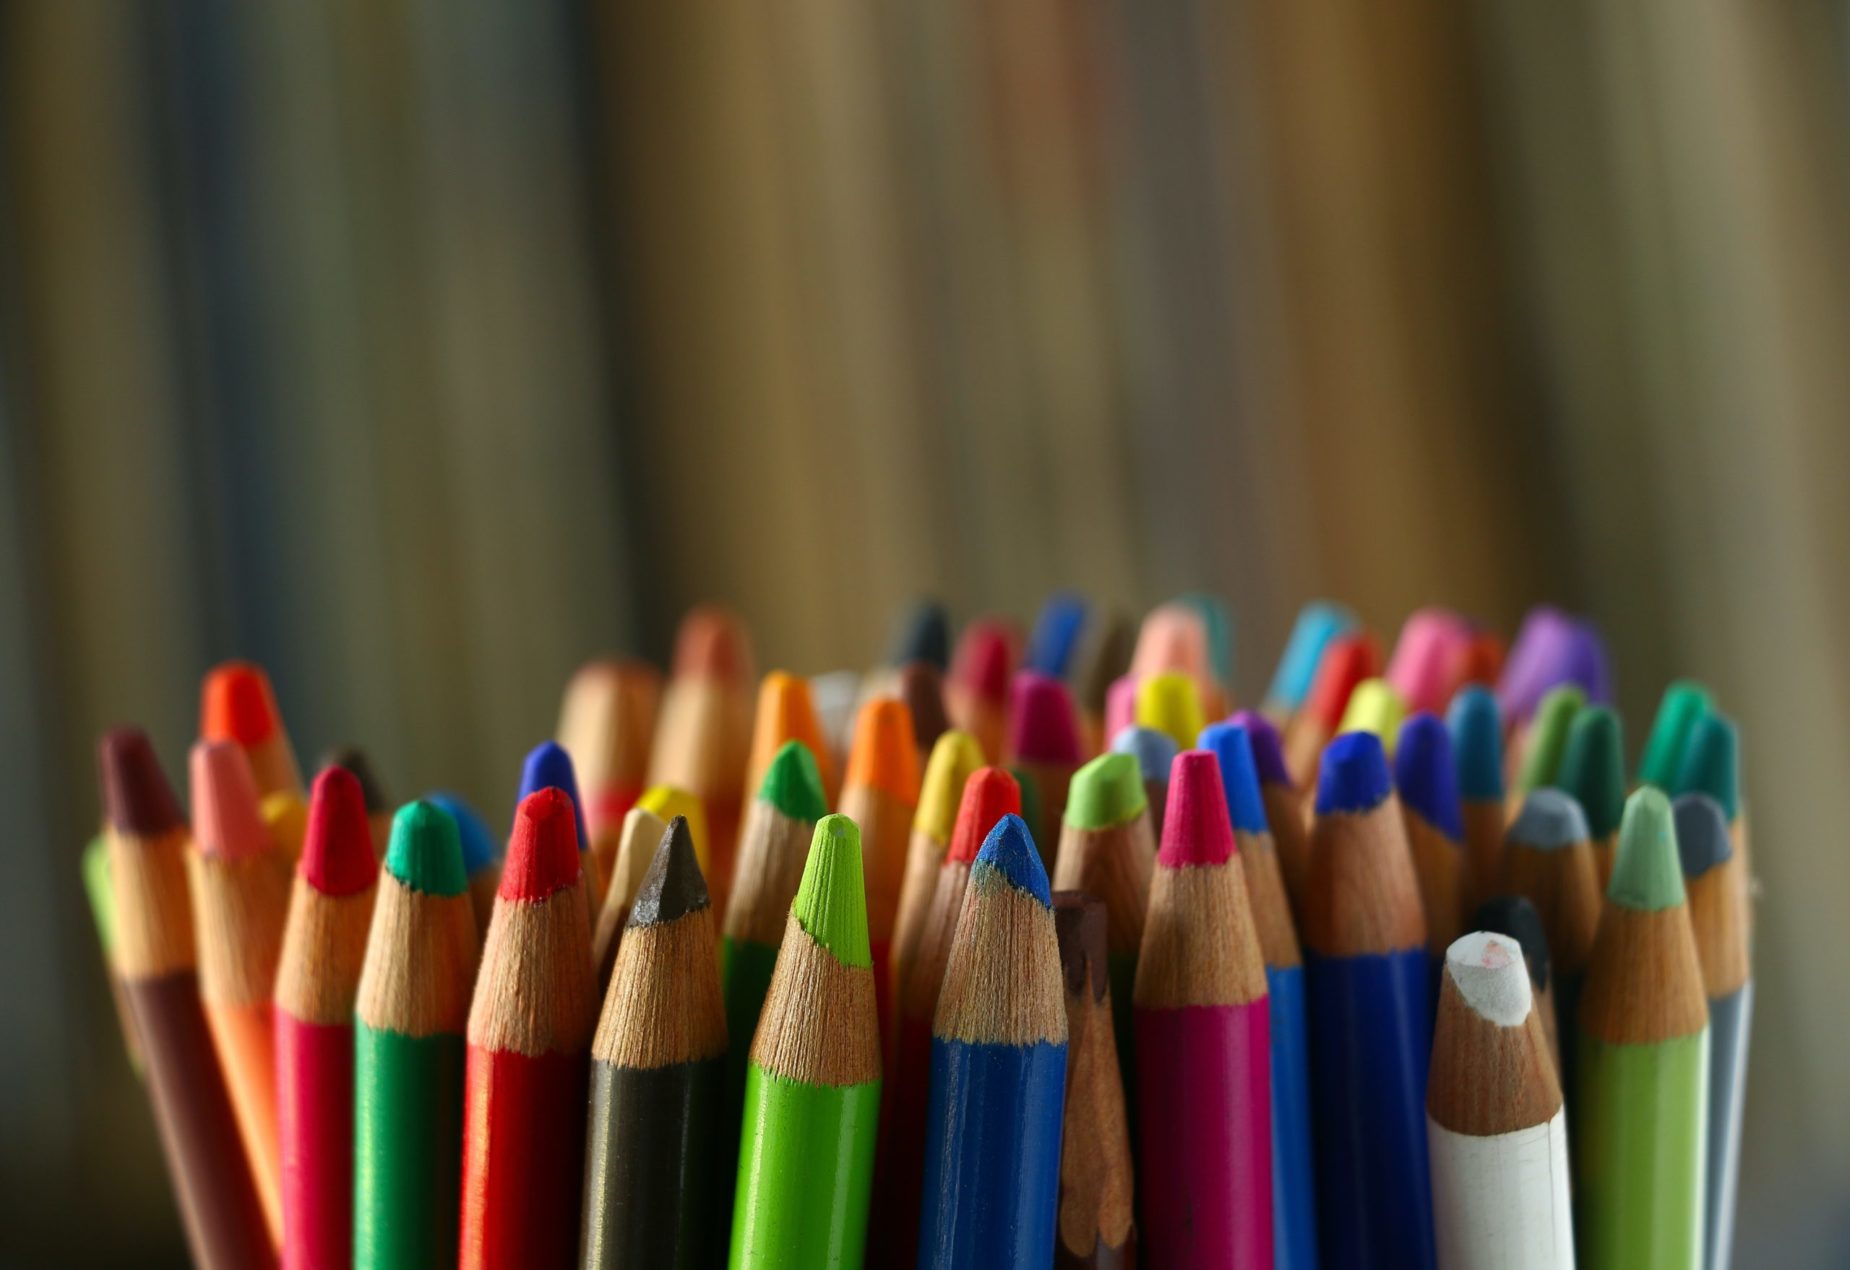 A large handful of colored pencils is in focus against a blurred, seemingly striped background.